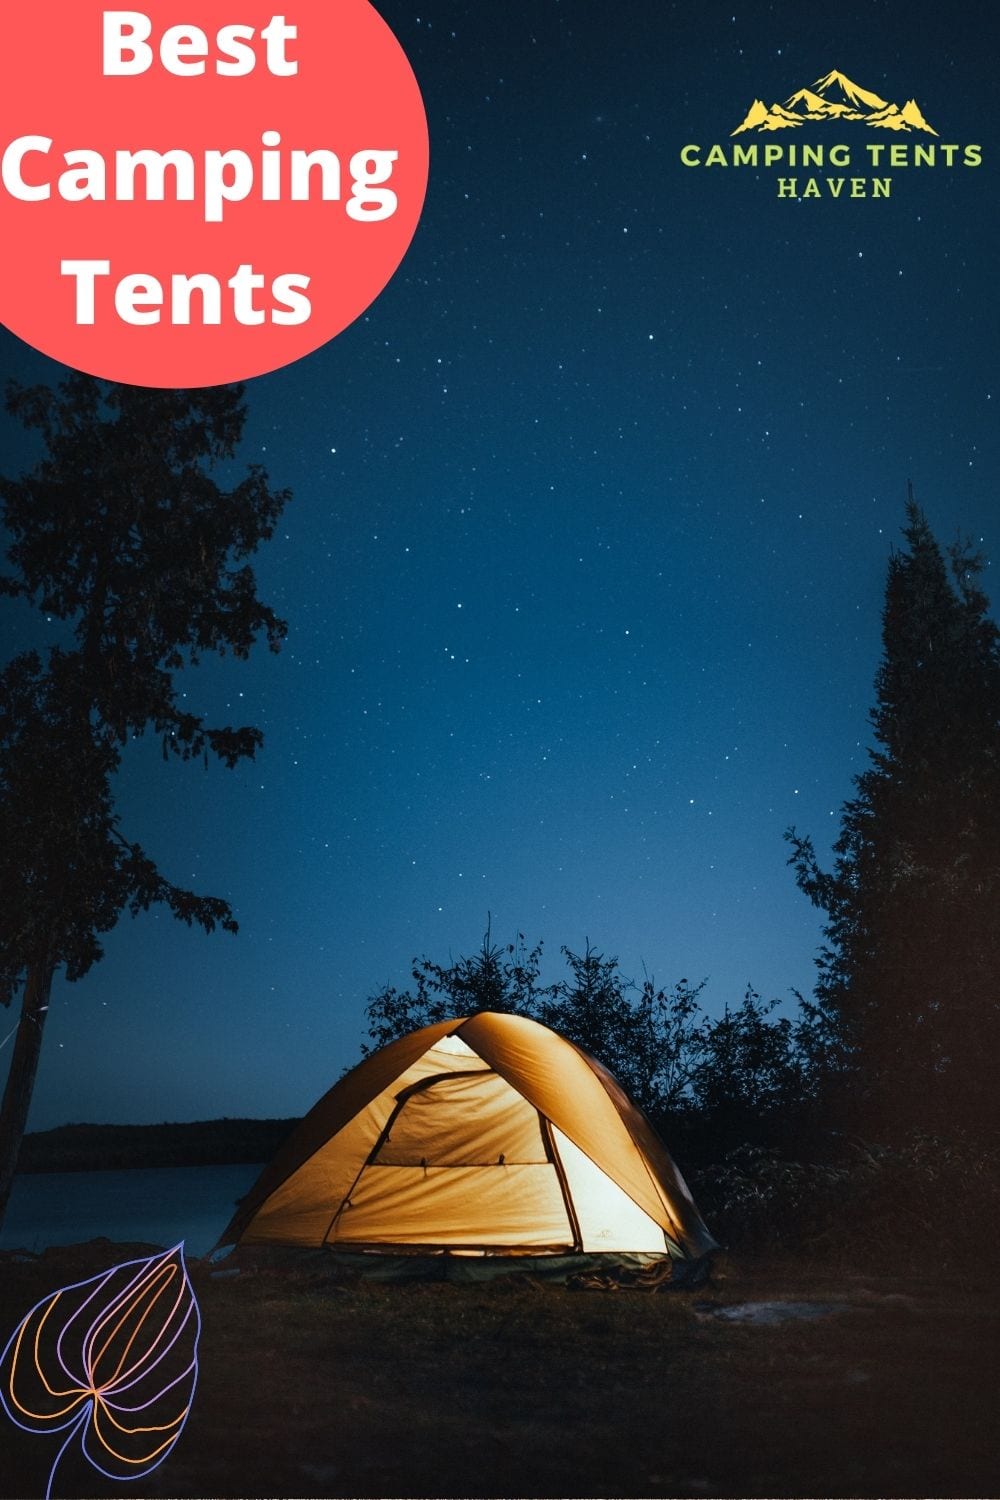 easy set up tents for camping